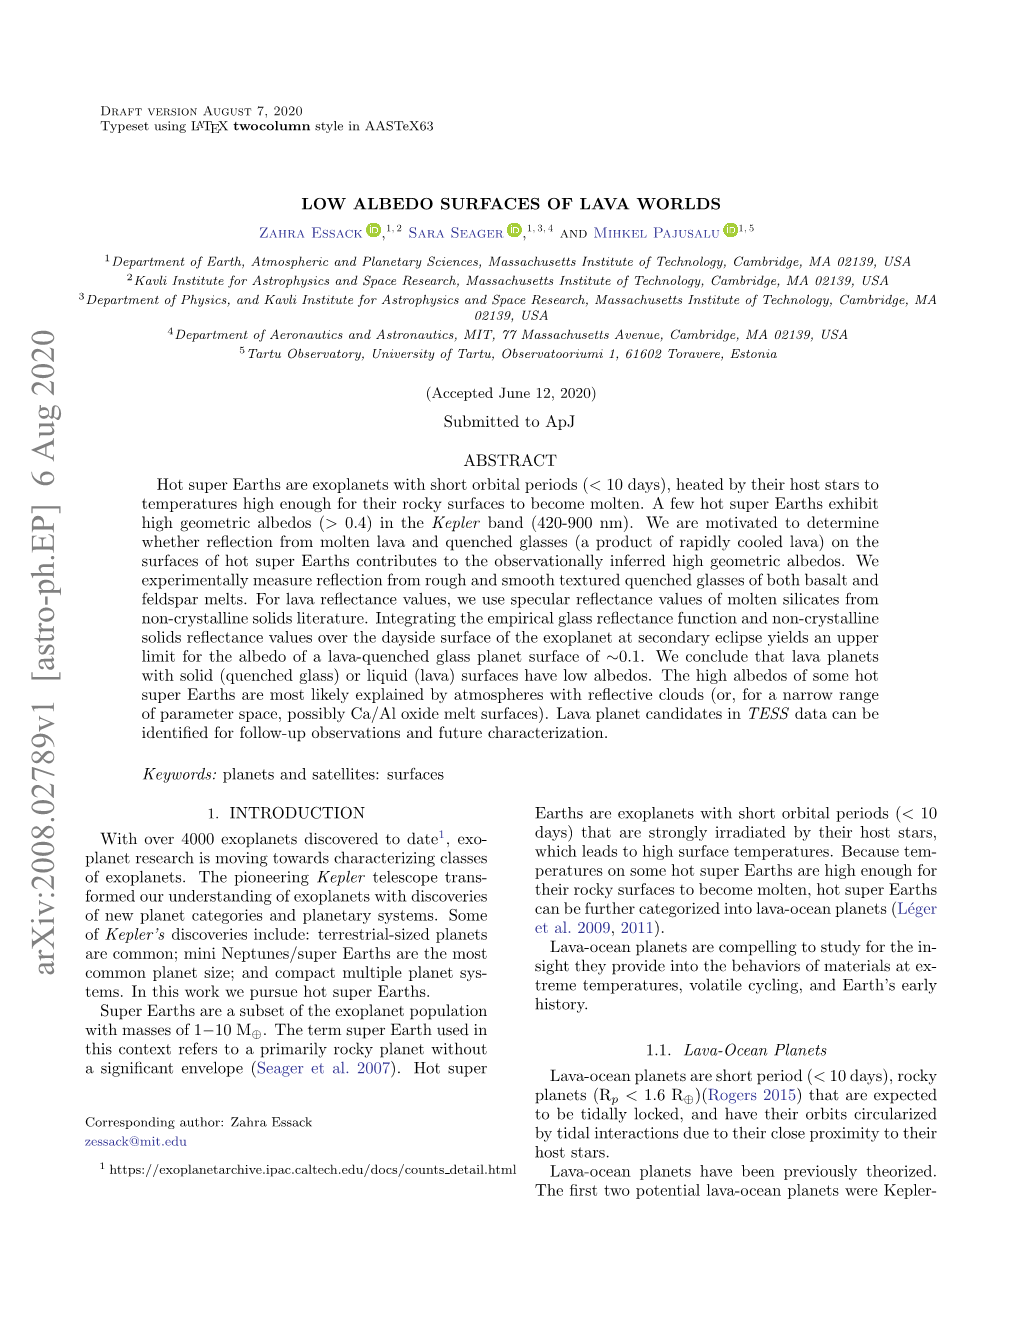 Arxiv:2008.02789V1 [Astro-Ph.EP] 6 Aug 2020 Common Planet Size; and Compact Multiple Planet Sys- Tems